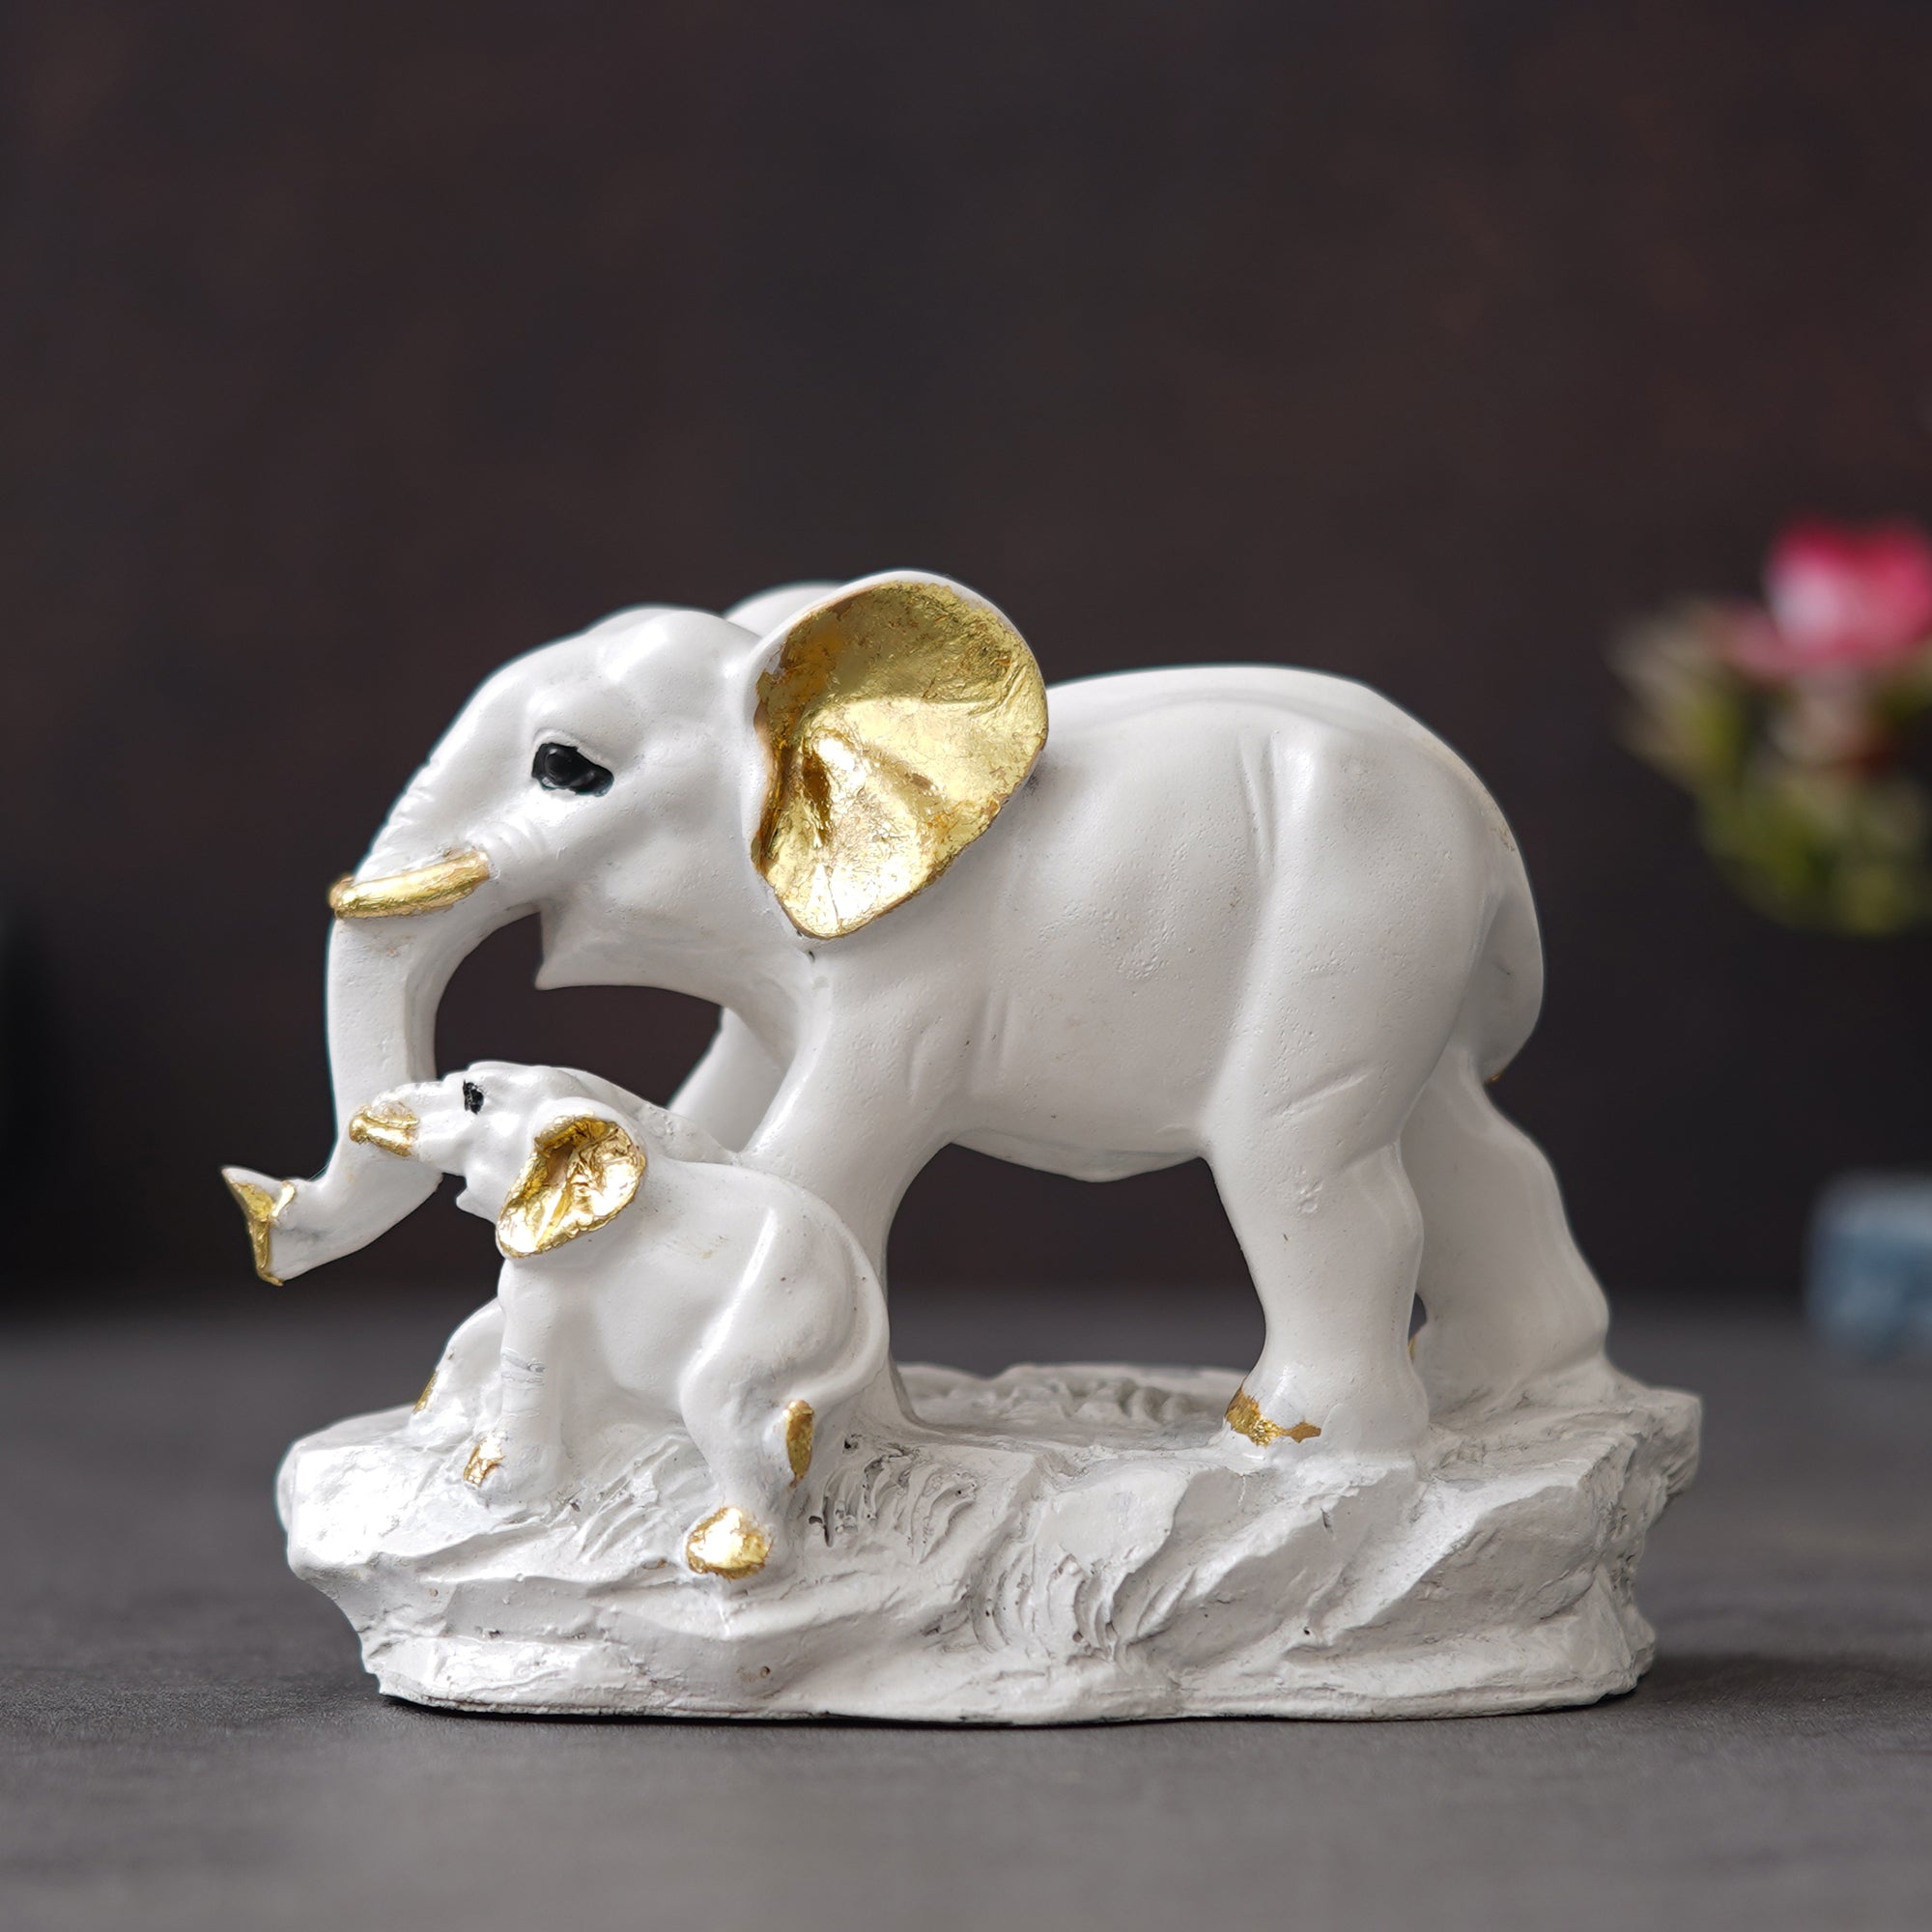 eCraftIndia White and Golden Cute Elephant with Baby Elephant Statues Animal Figurines Decorative Showpieces for Home Decor 5